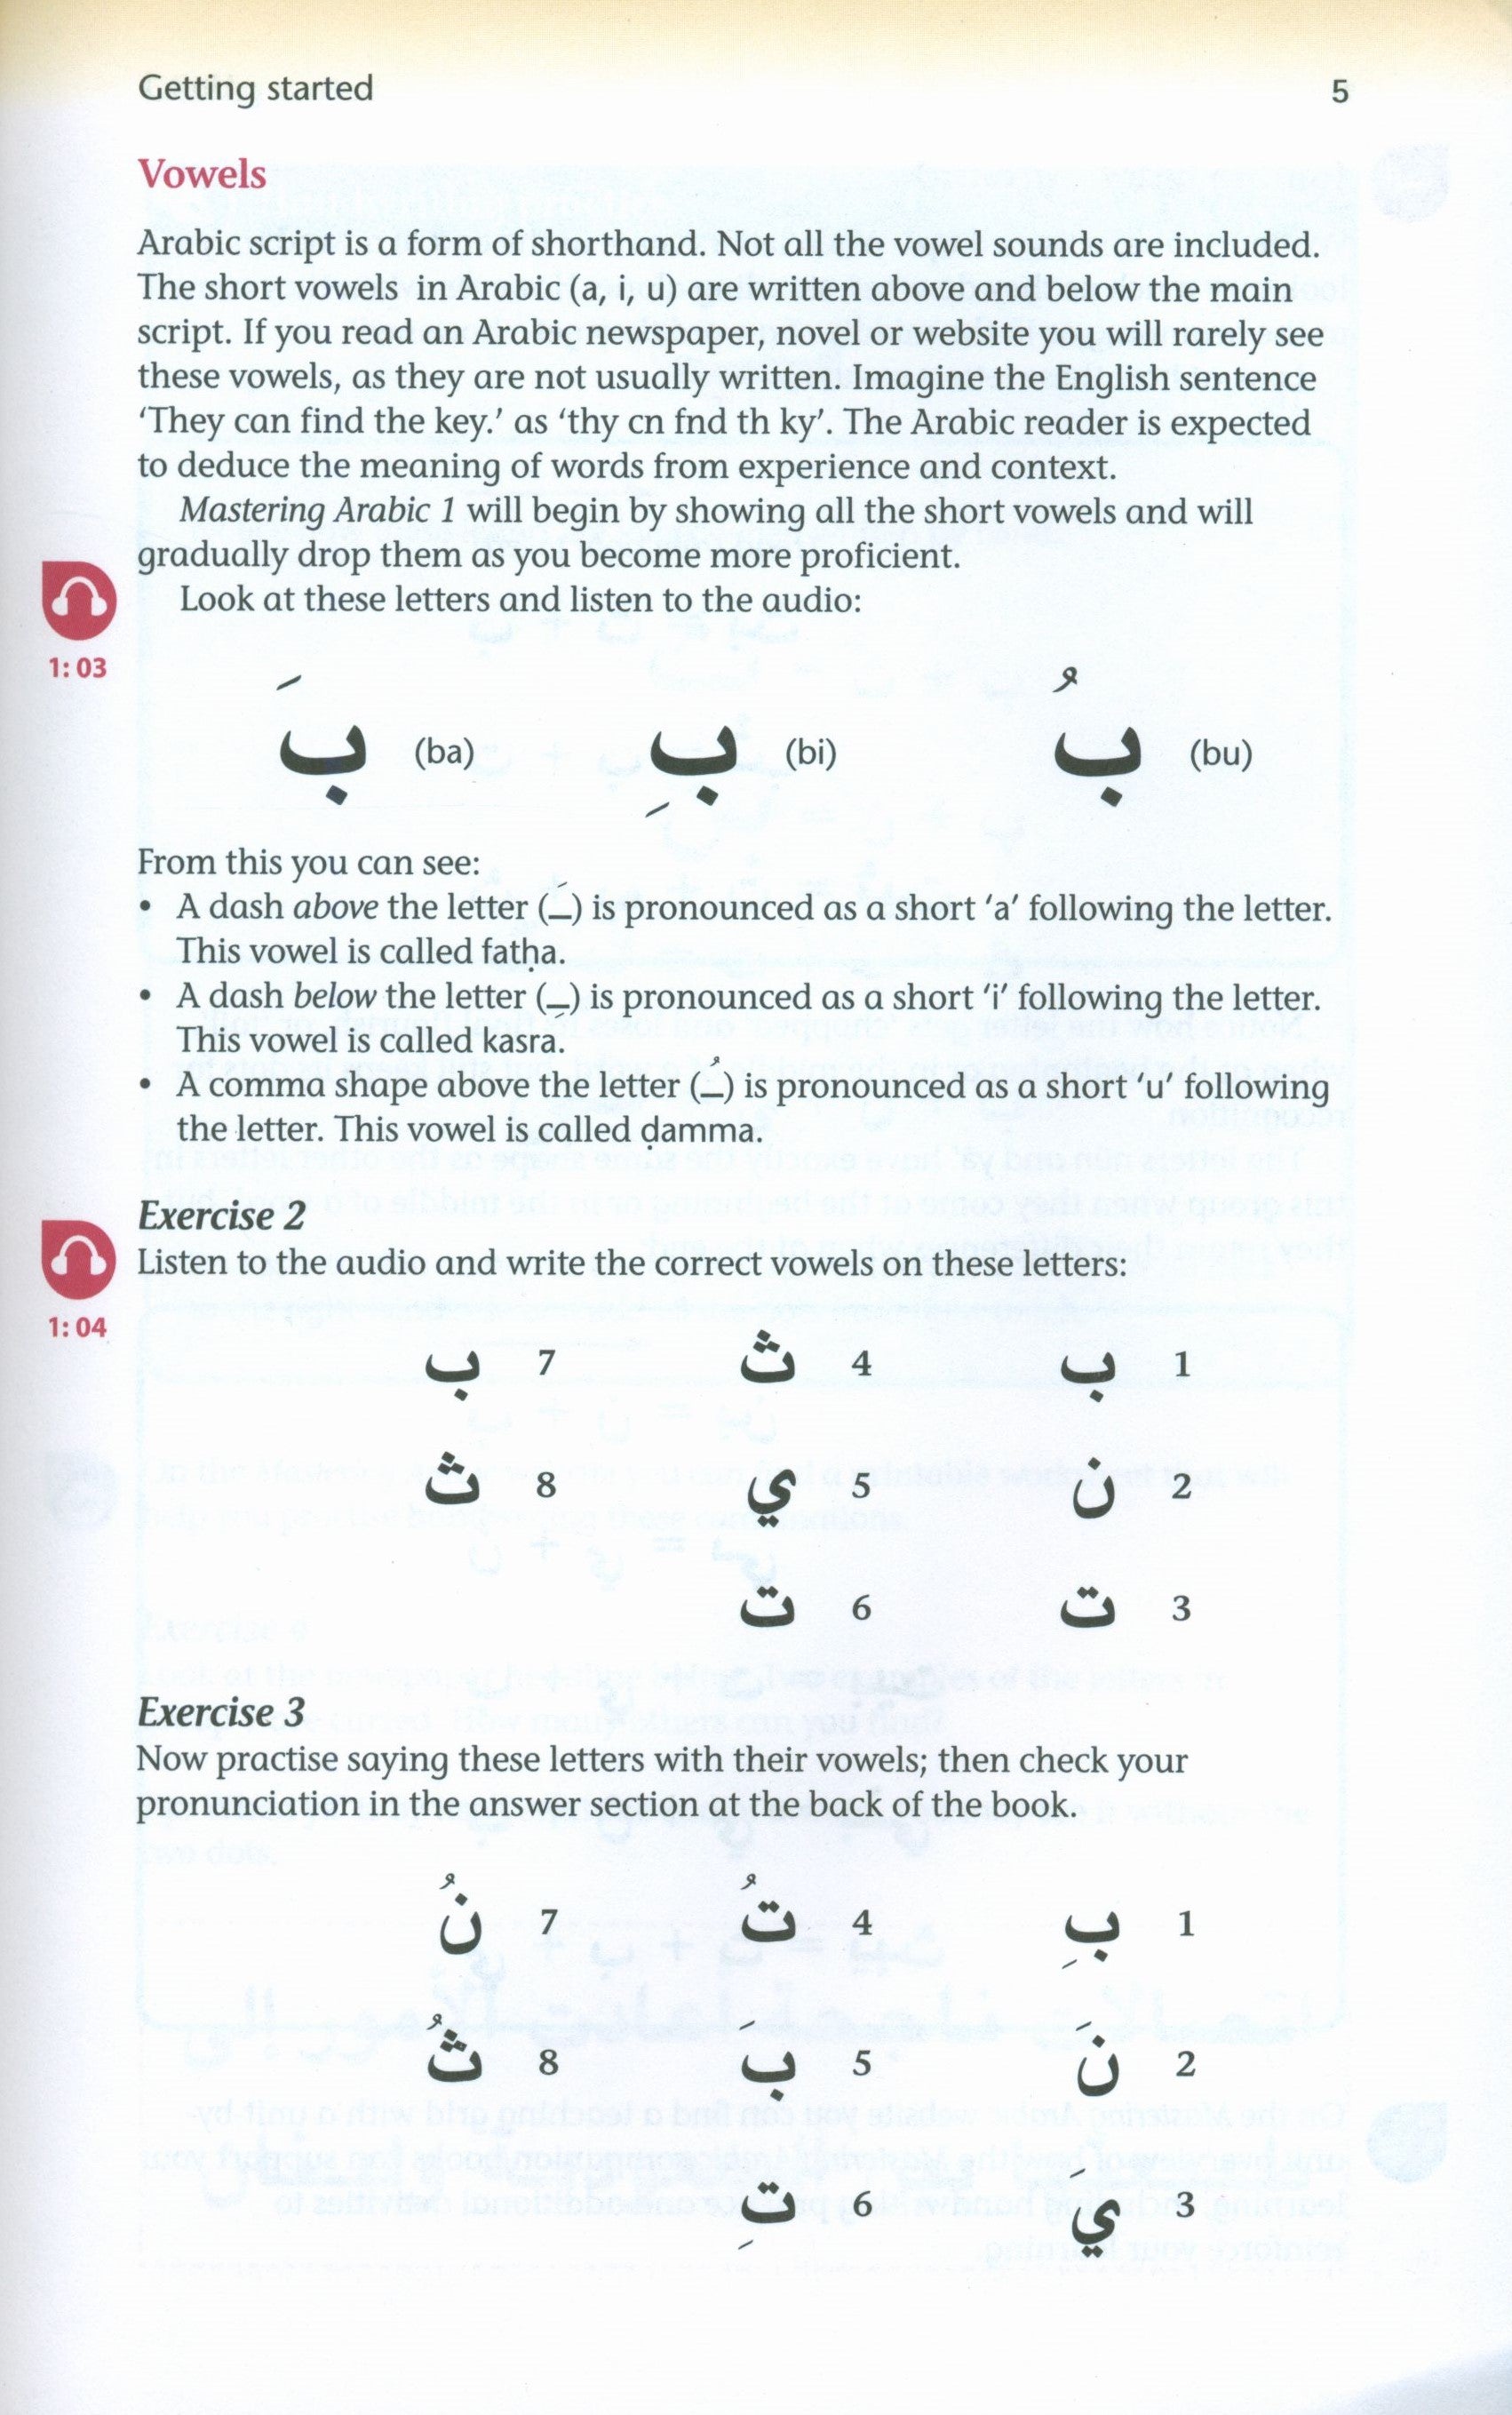 Mastering Arabic 1 with Online Audio